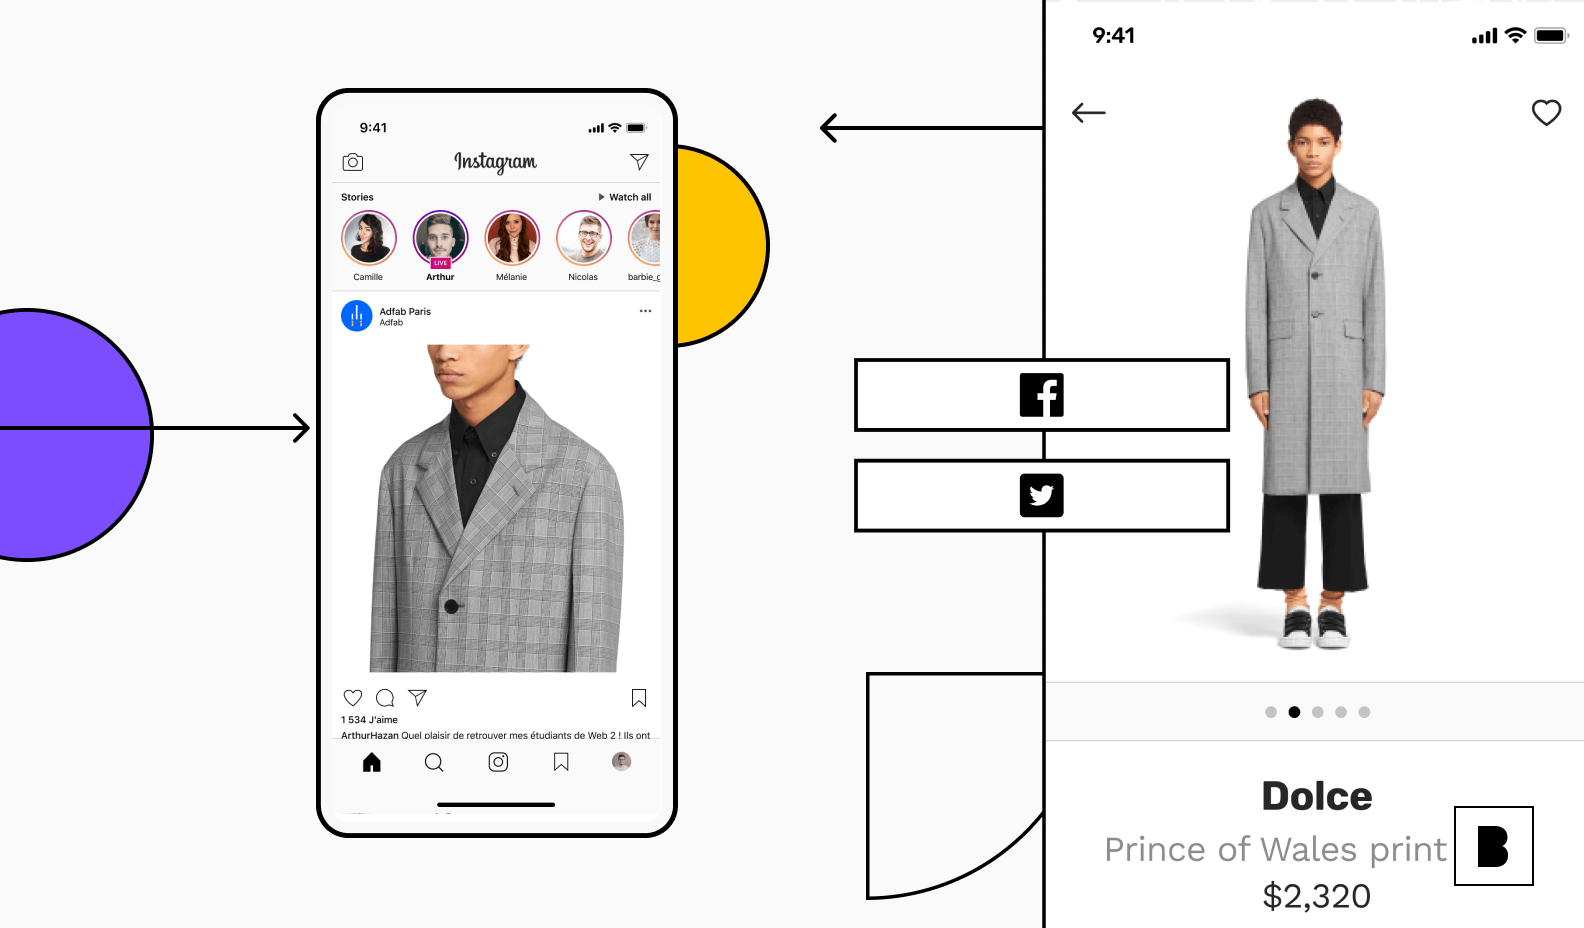 Social networking app - Instagaram illustration with social icons